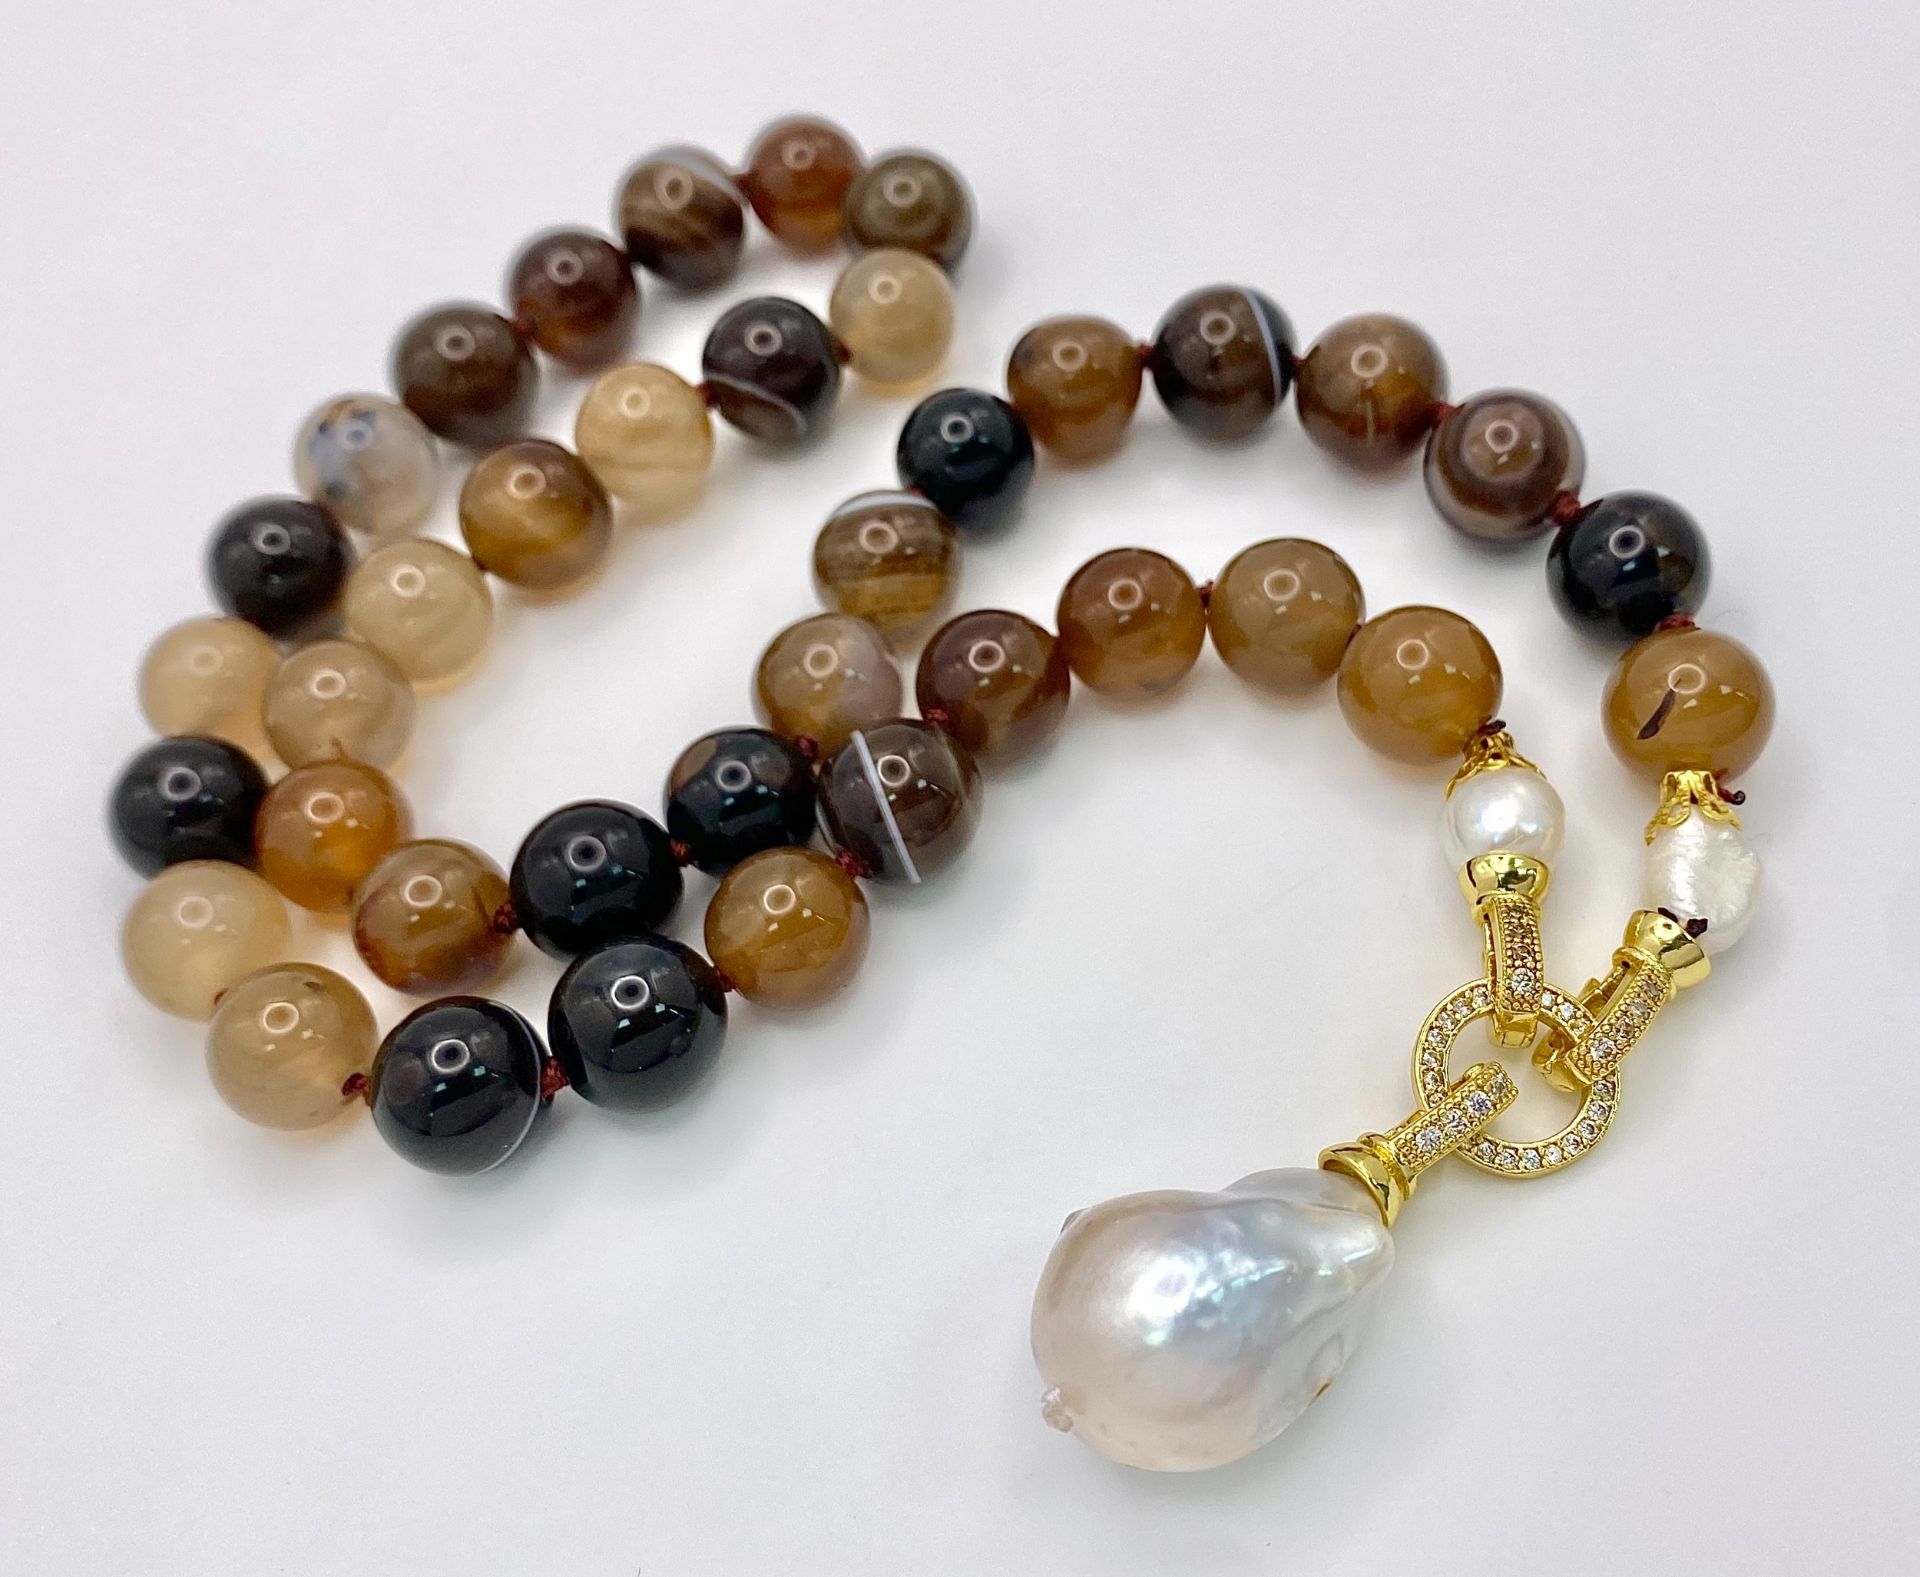 A Brown Stripe Agate Beaded Necklace with Hanging Baroque Keisha Pearl Pendant. 12mm beads. Gilded - Bild 2 aus 3